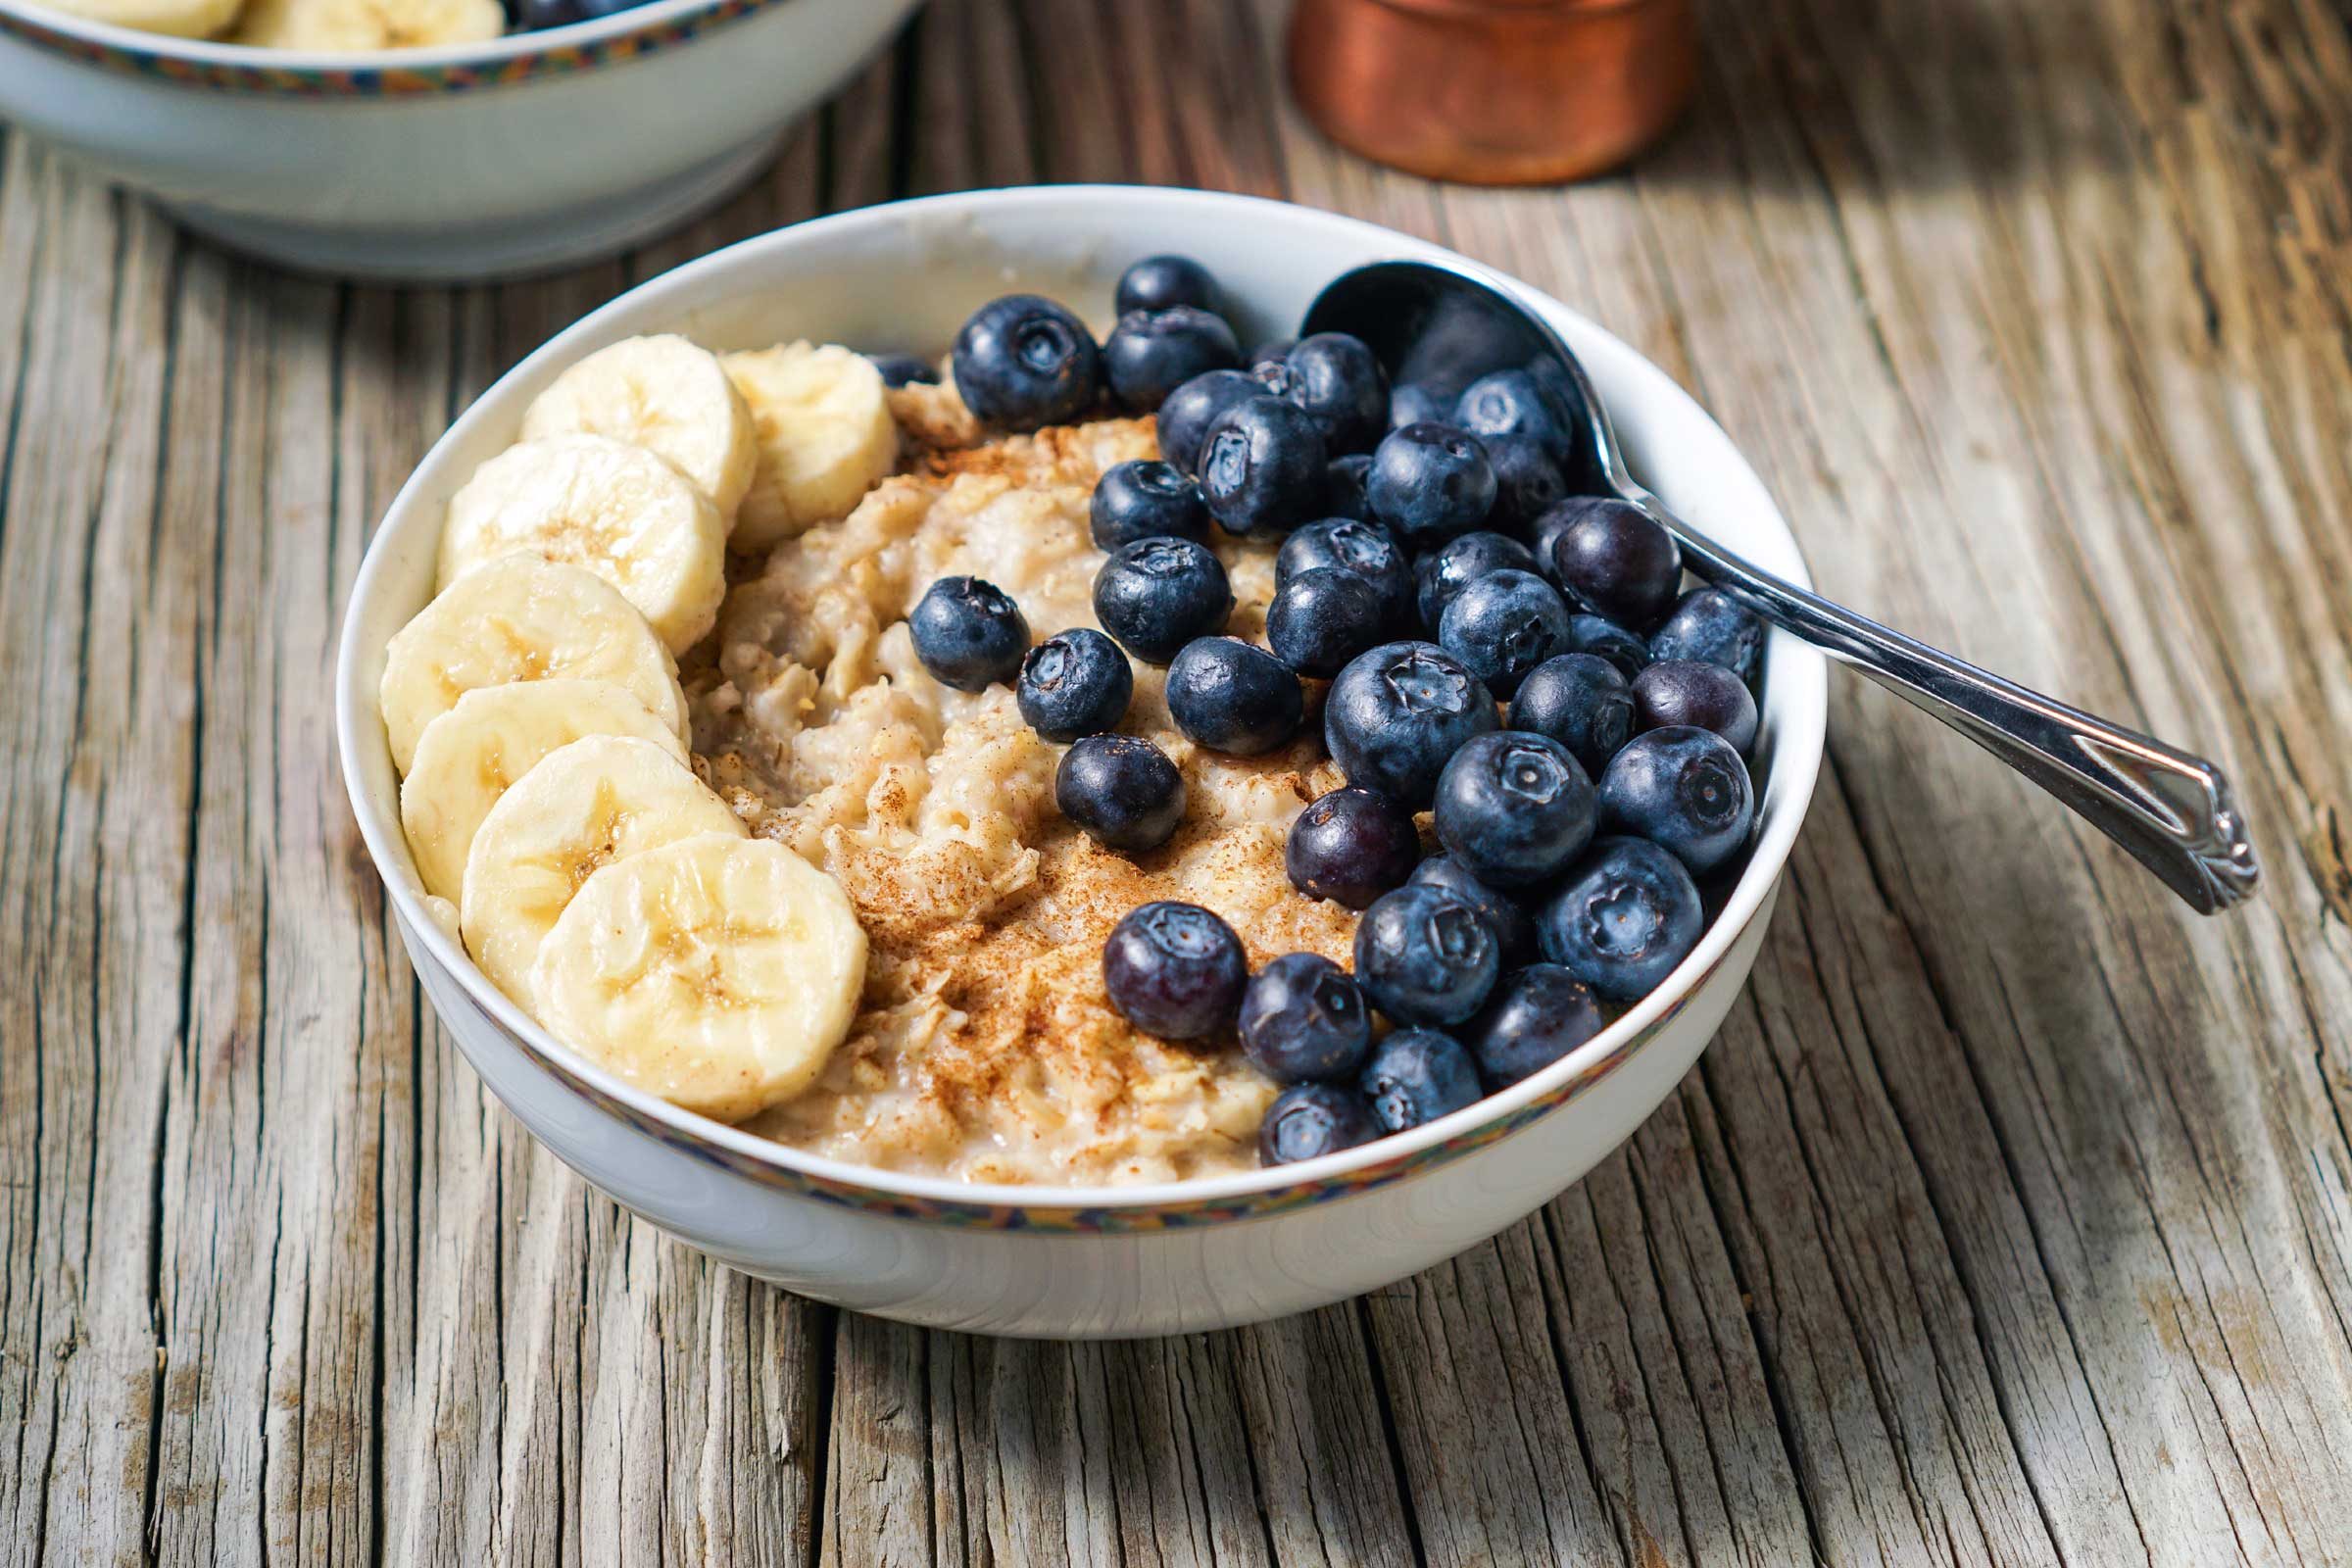 Mix half a cup of blueberries into your morning cereal